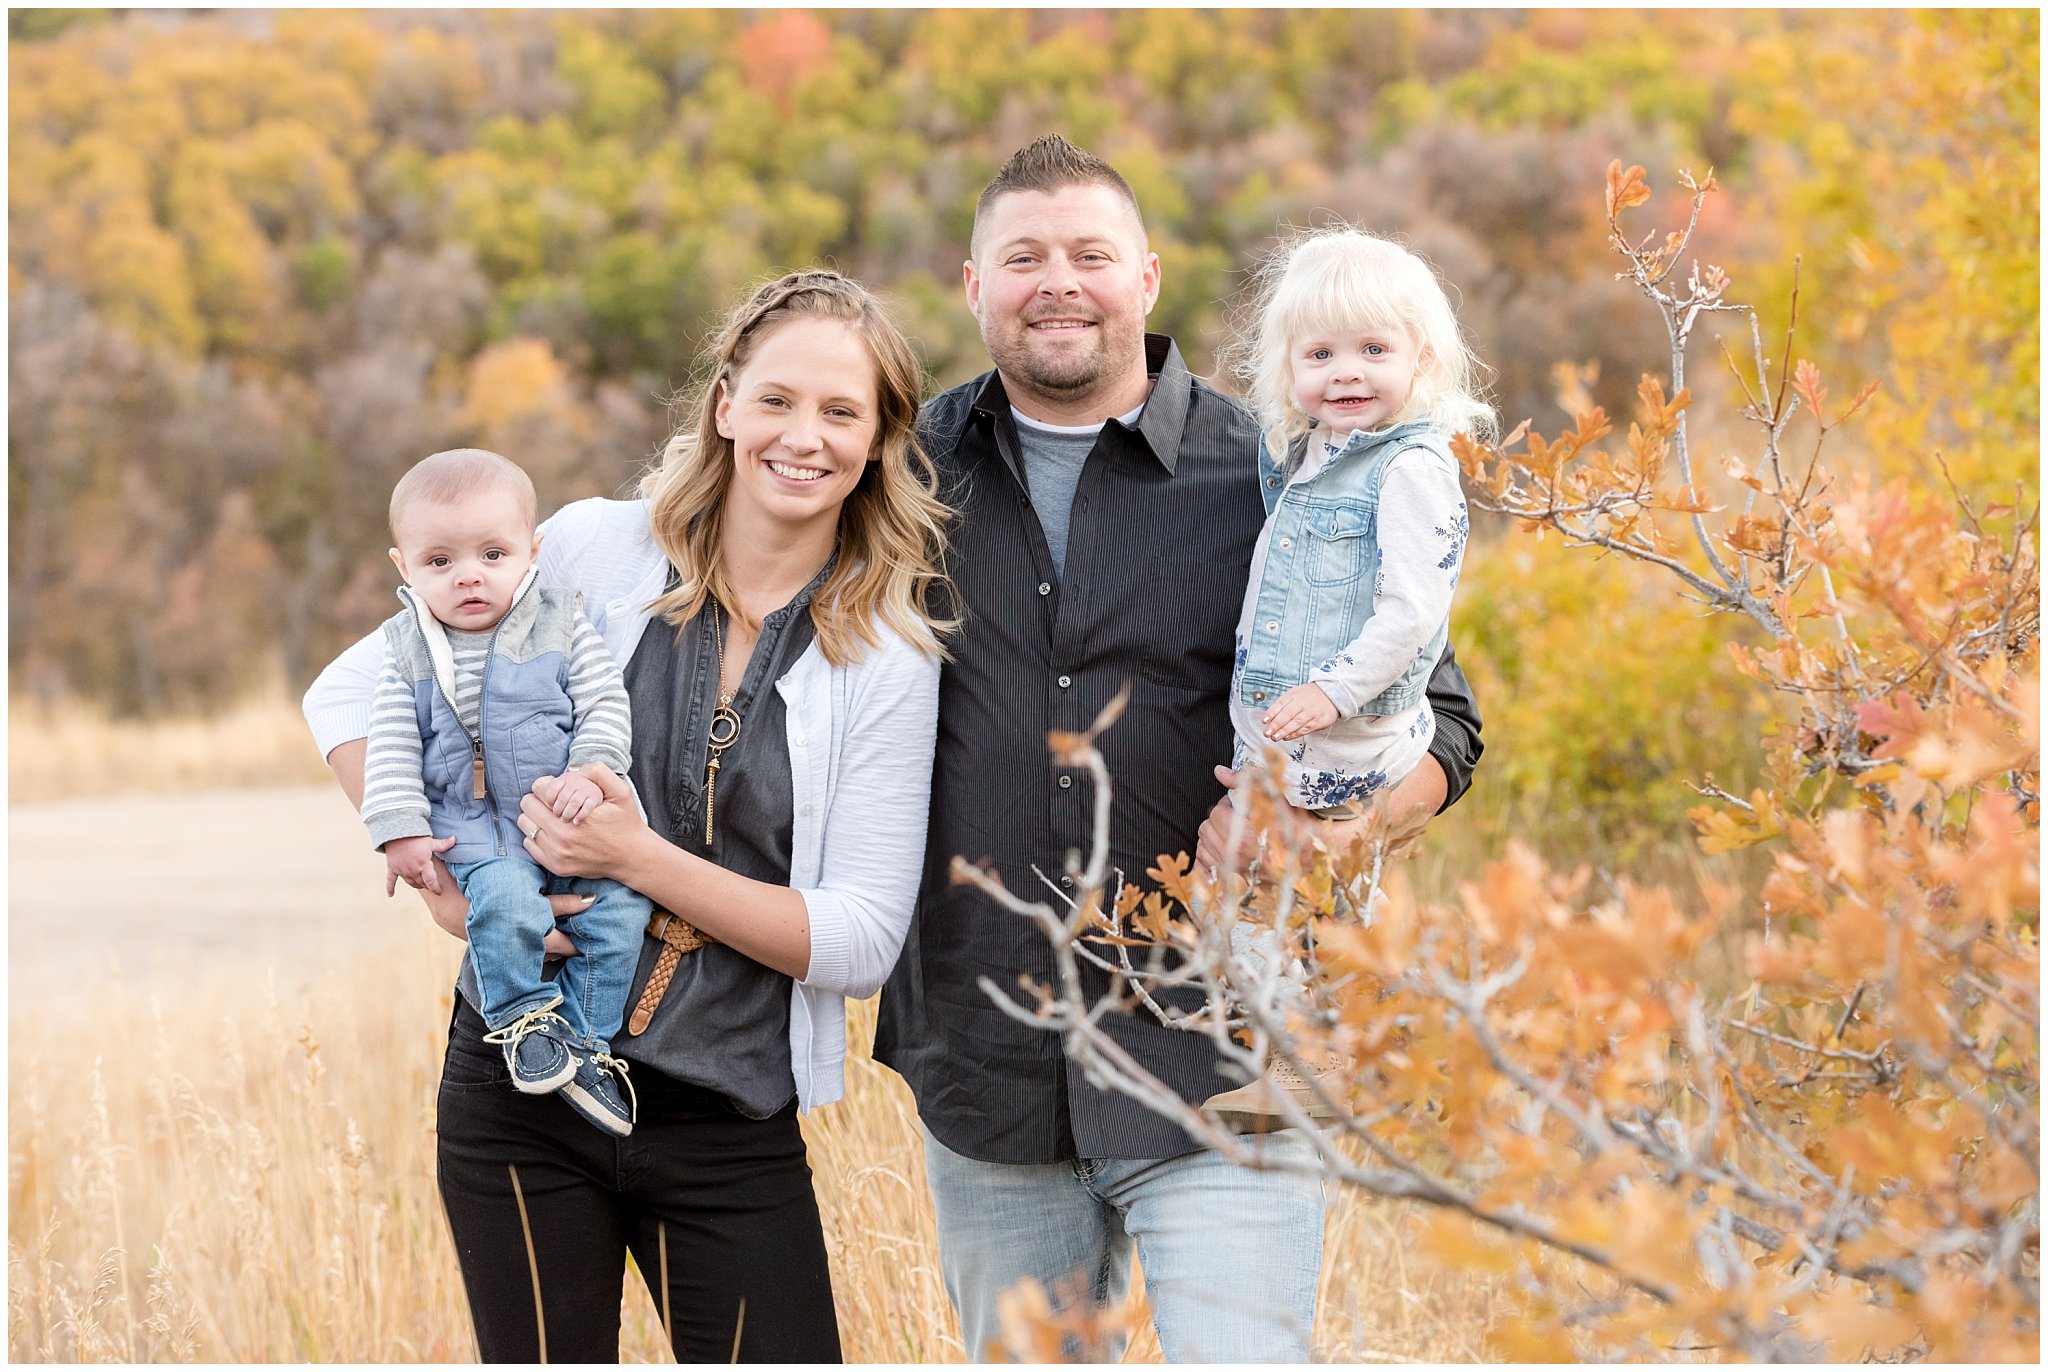 Family at Snow Basin resort in the fall | Utah Family pictures | fall leaves and colors